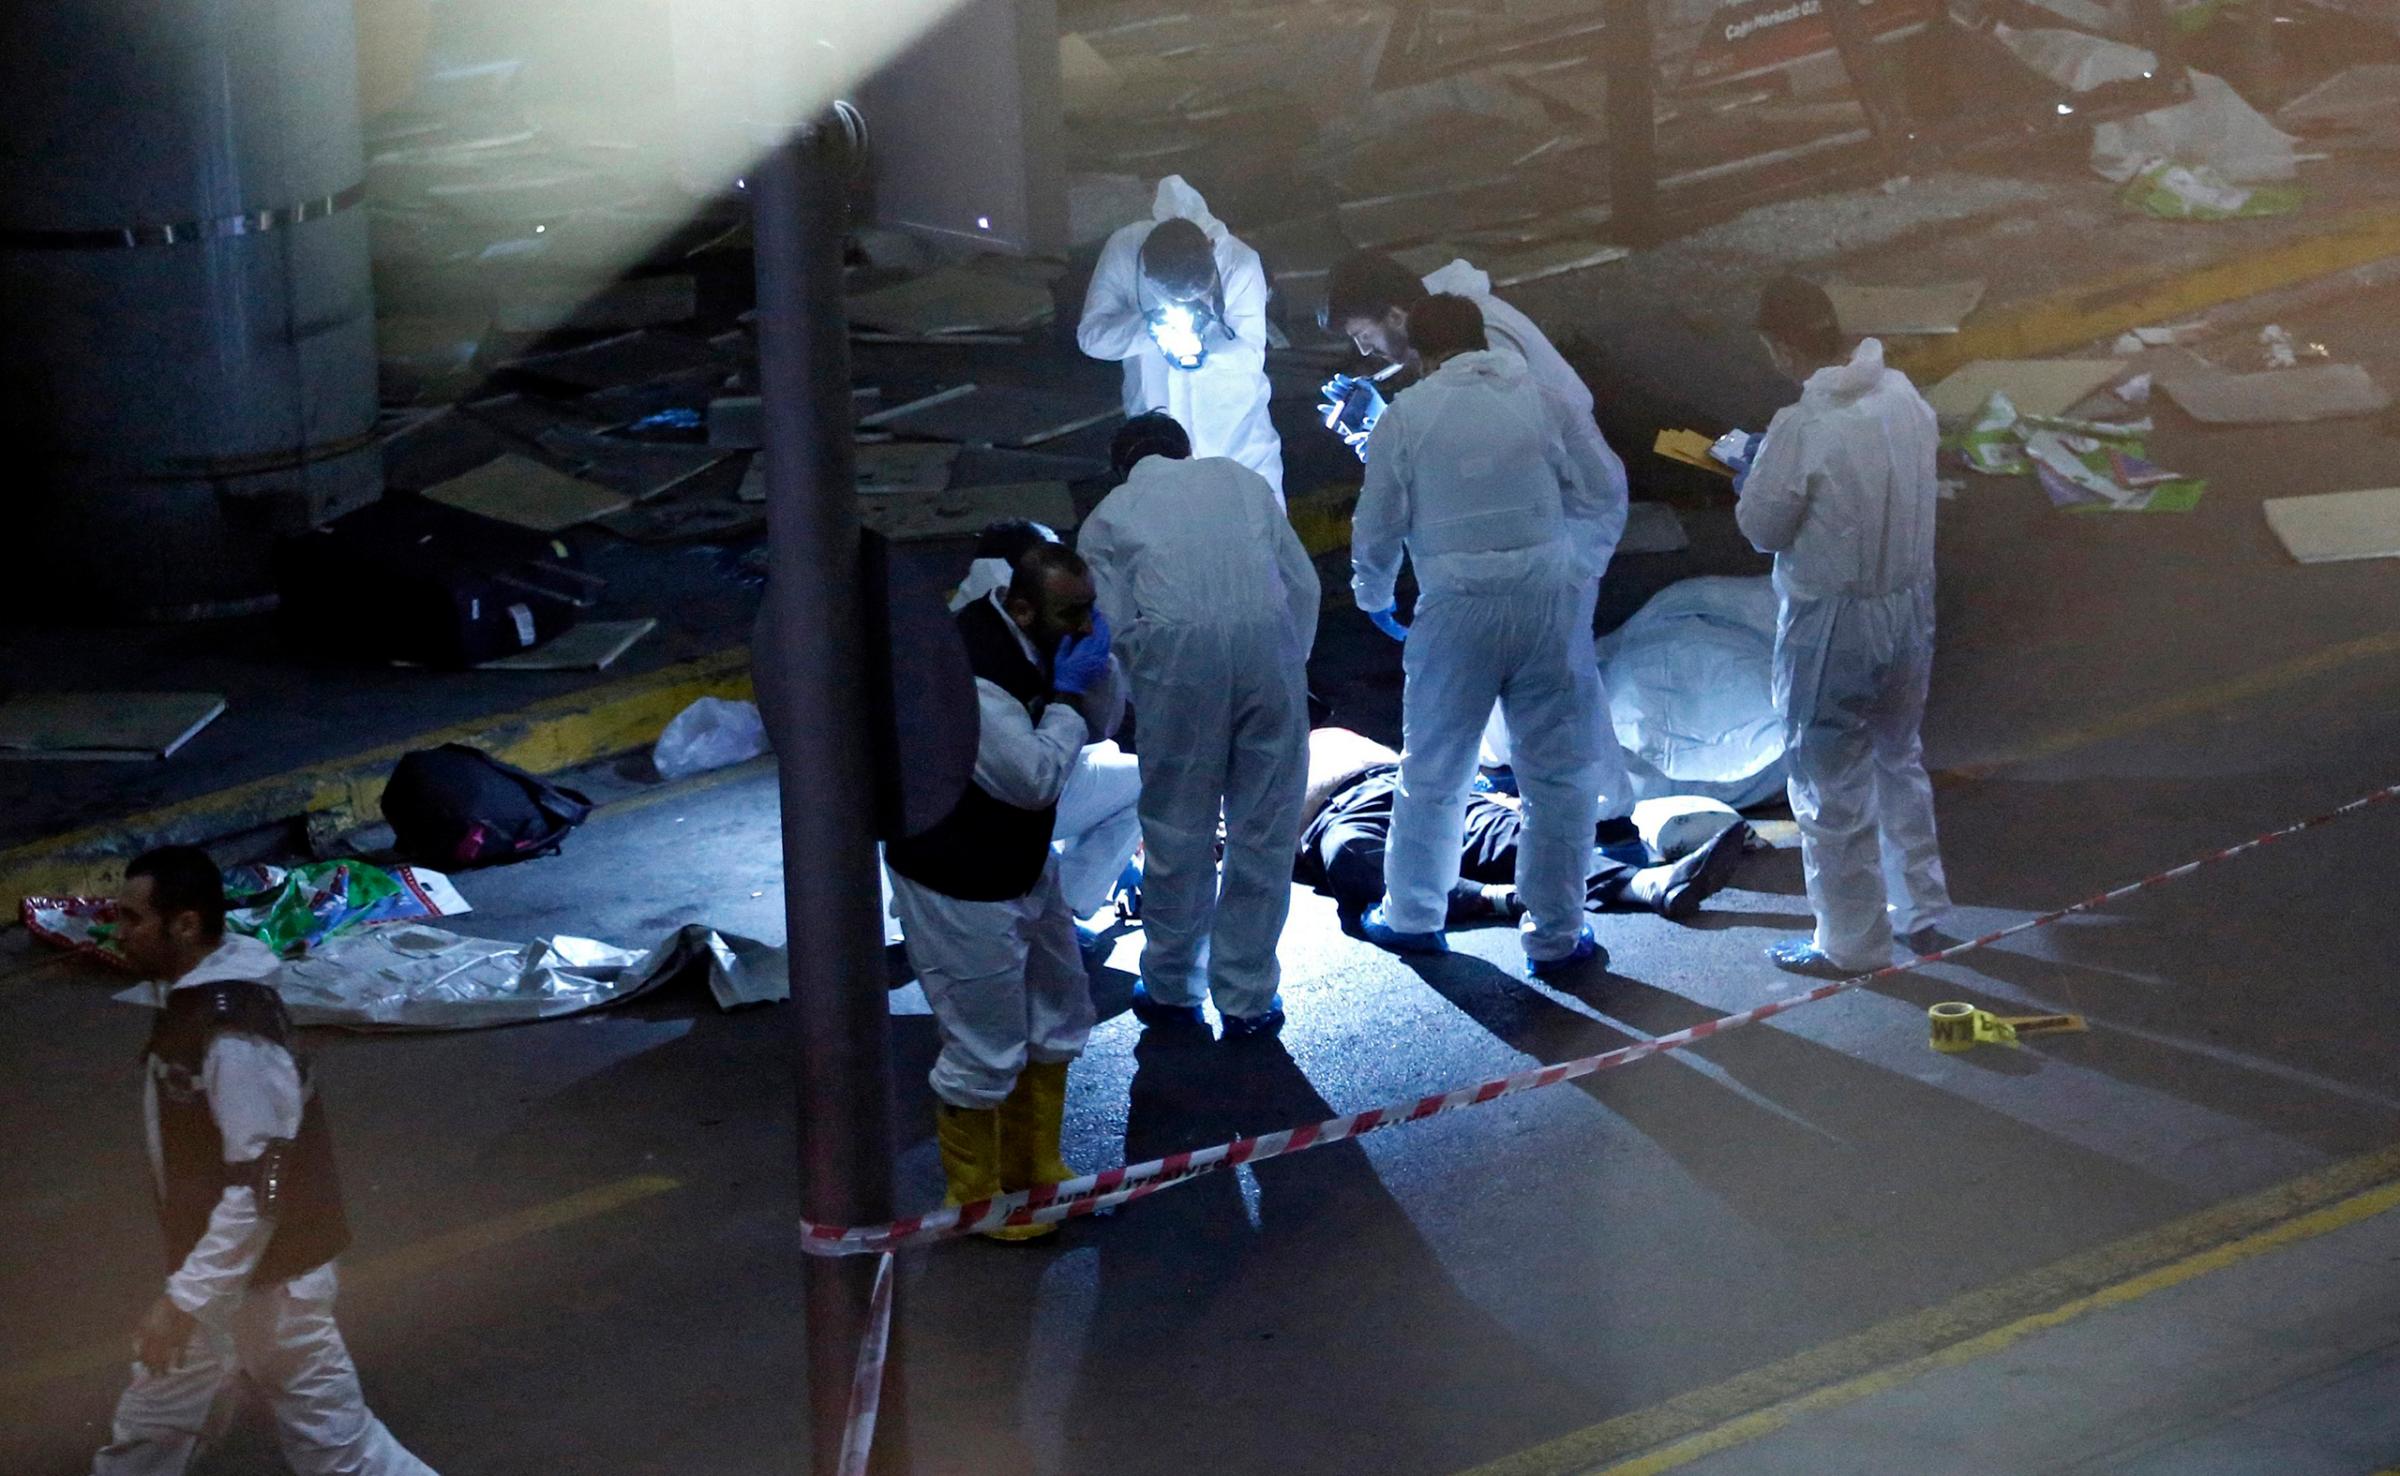 Crime scene investigators work next to a body after a suicide bomb attack at Ataturk Airport in Istanbul on June 28, 2016.